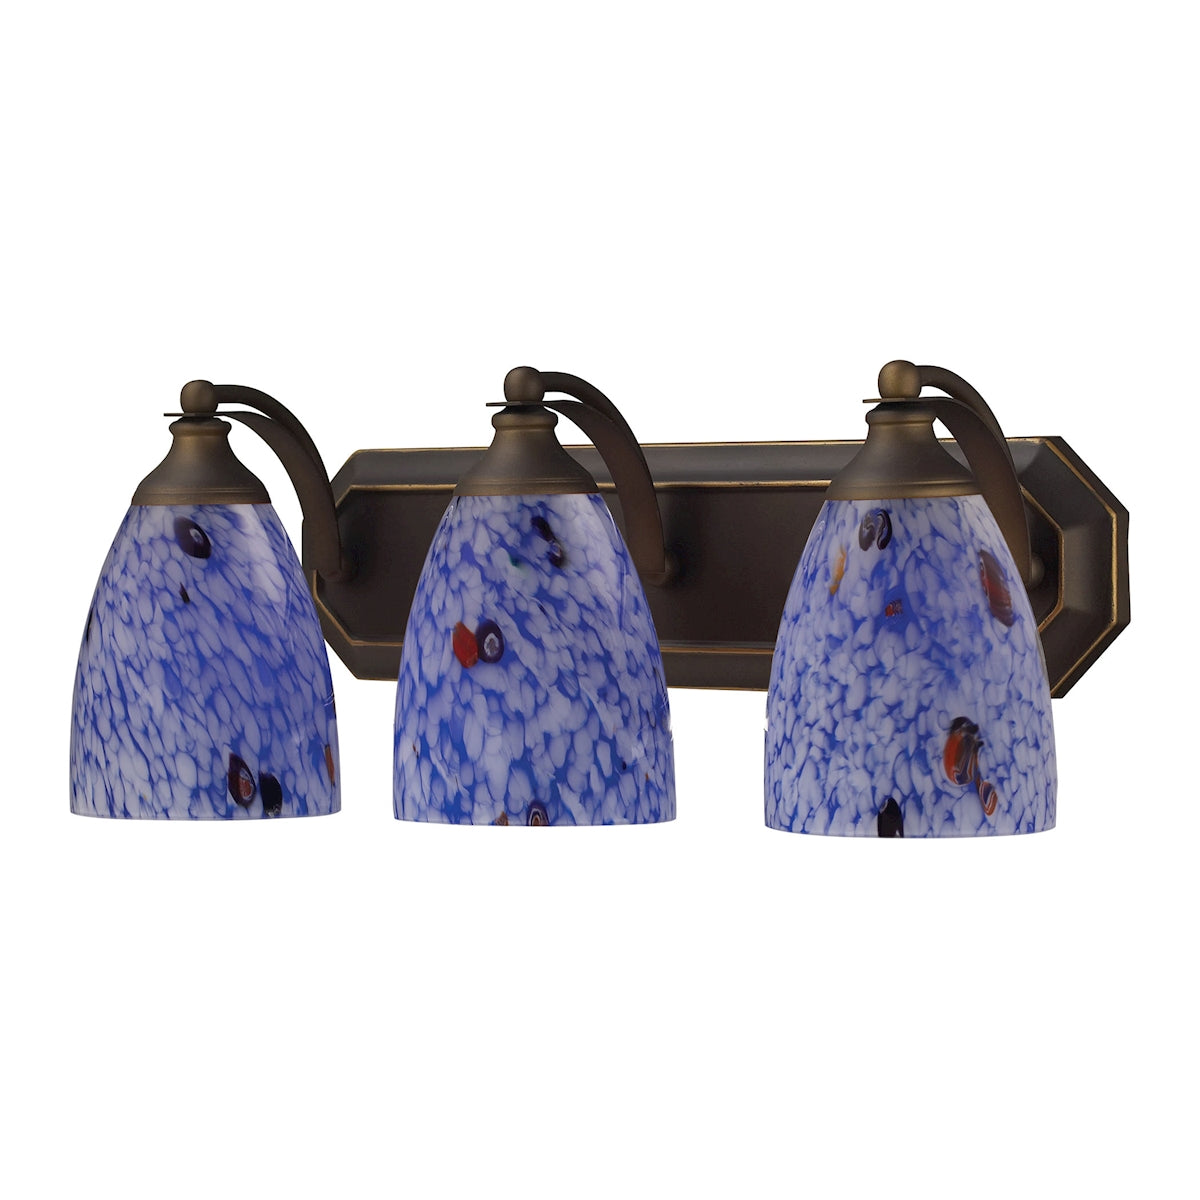 Mix-N-Match Vanity 3-Light Wall Lamp in Aged Bronze with Starburst Blue Glass